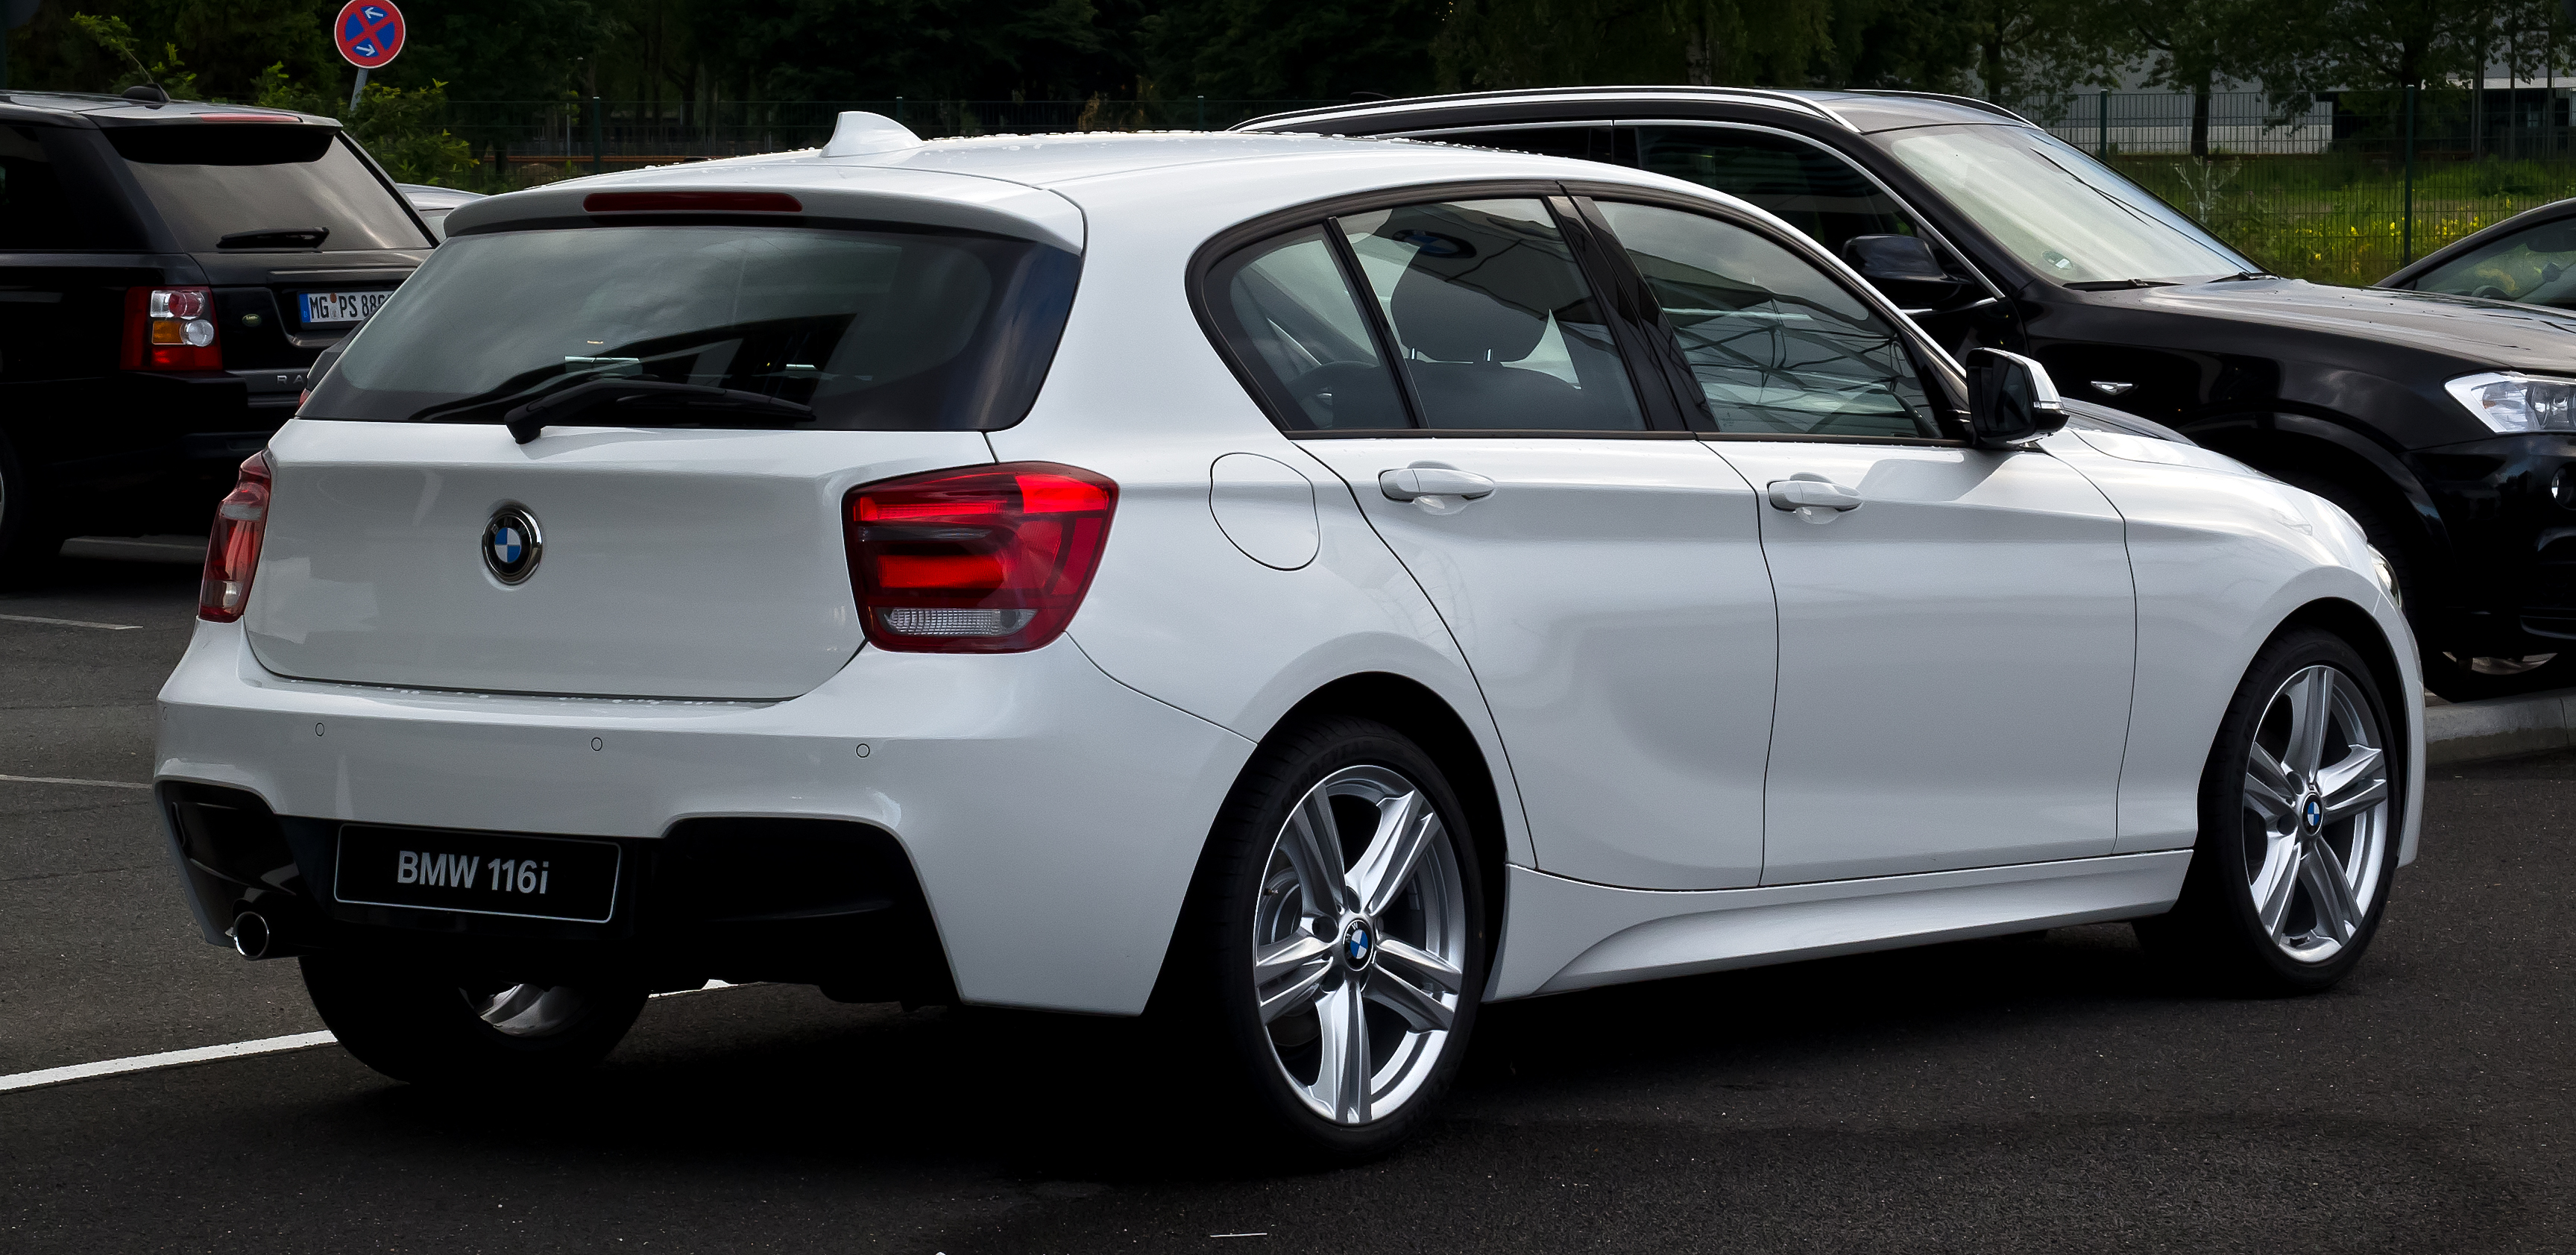 BMW 116 2015: Review, Amazing Pictures and Images – Look at the car
